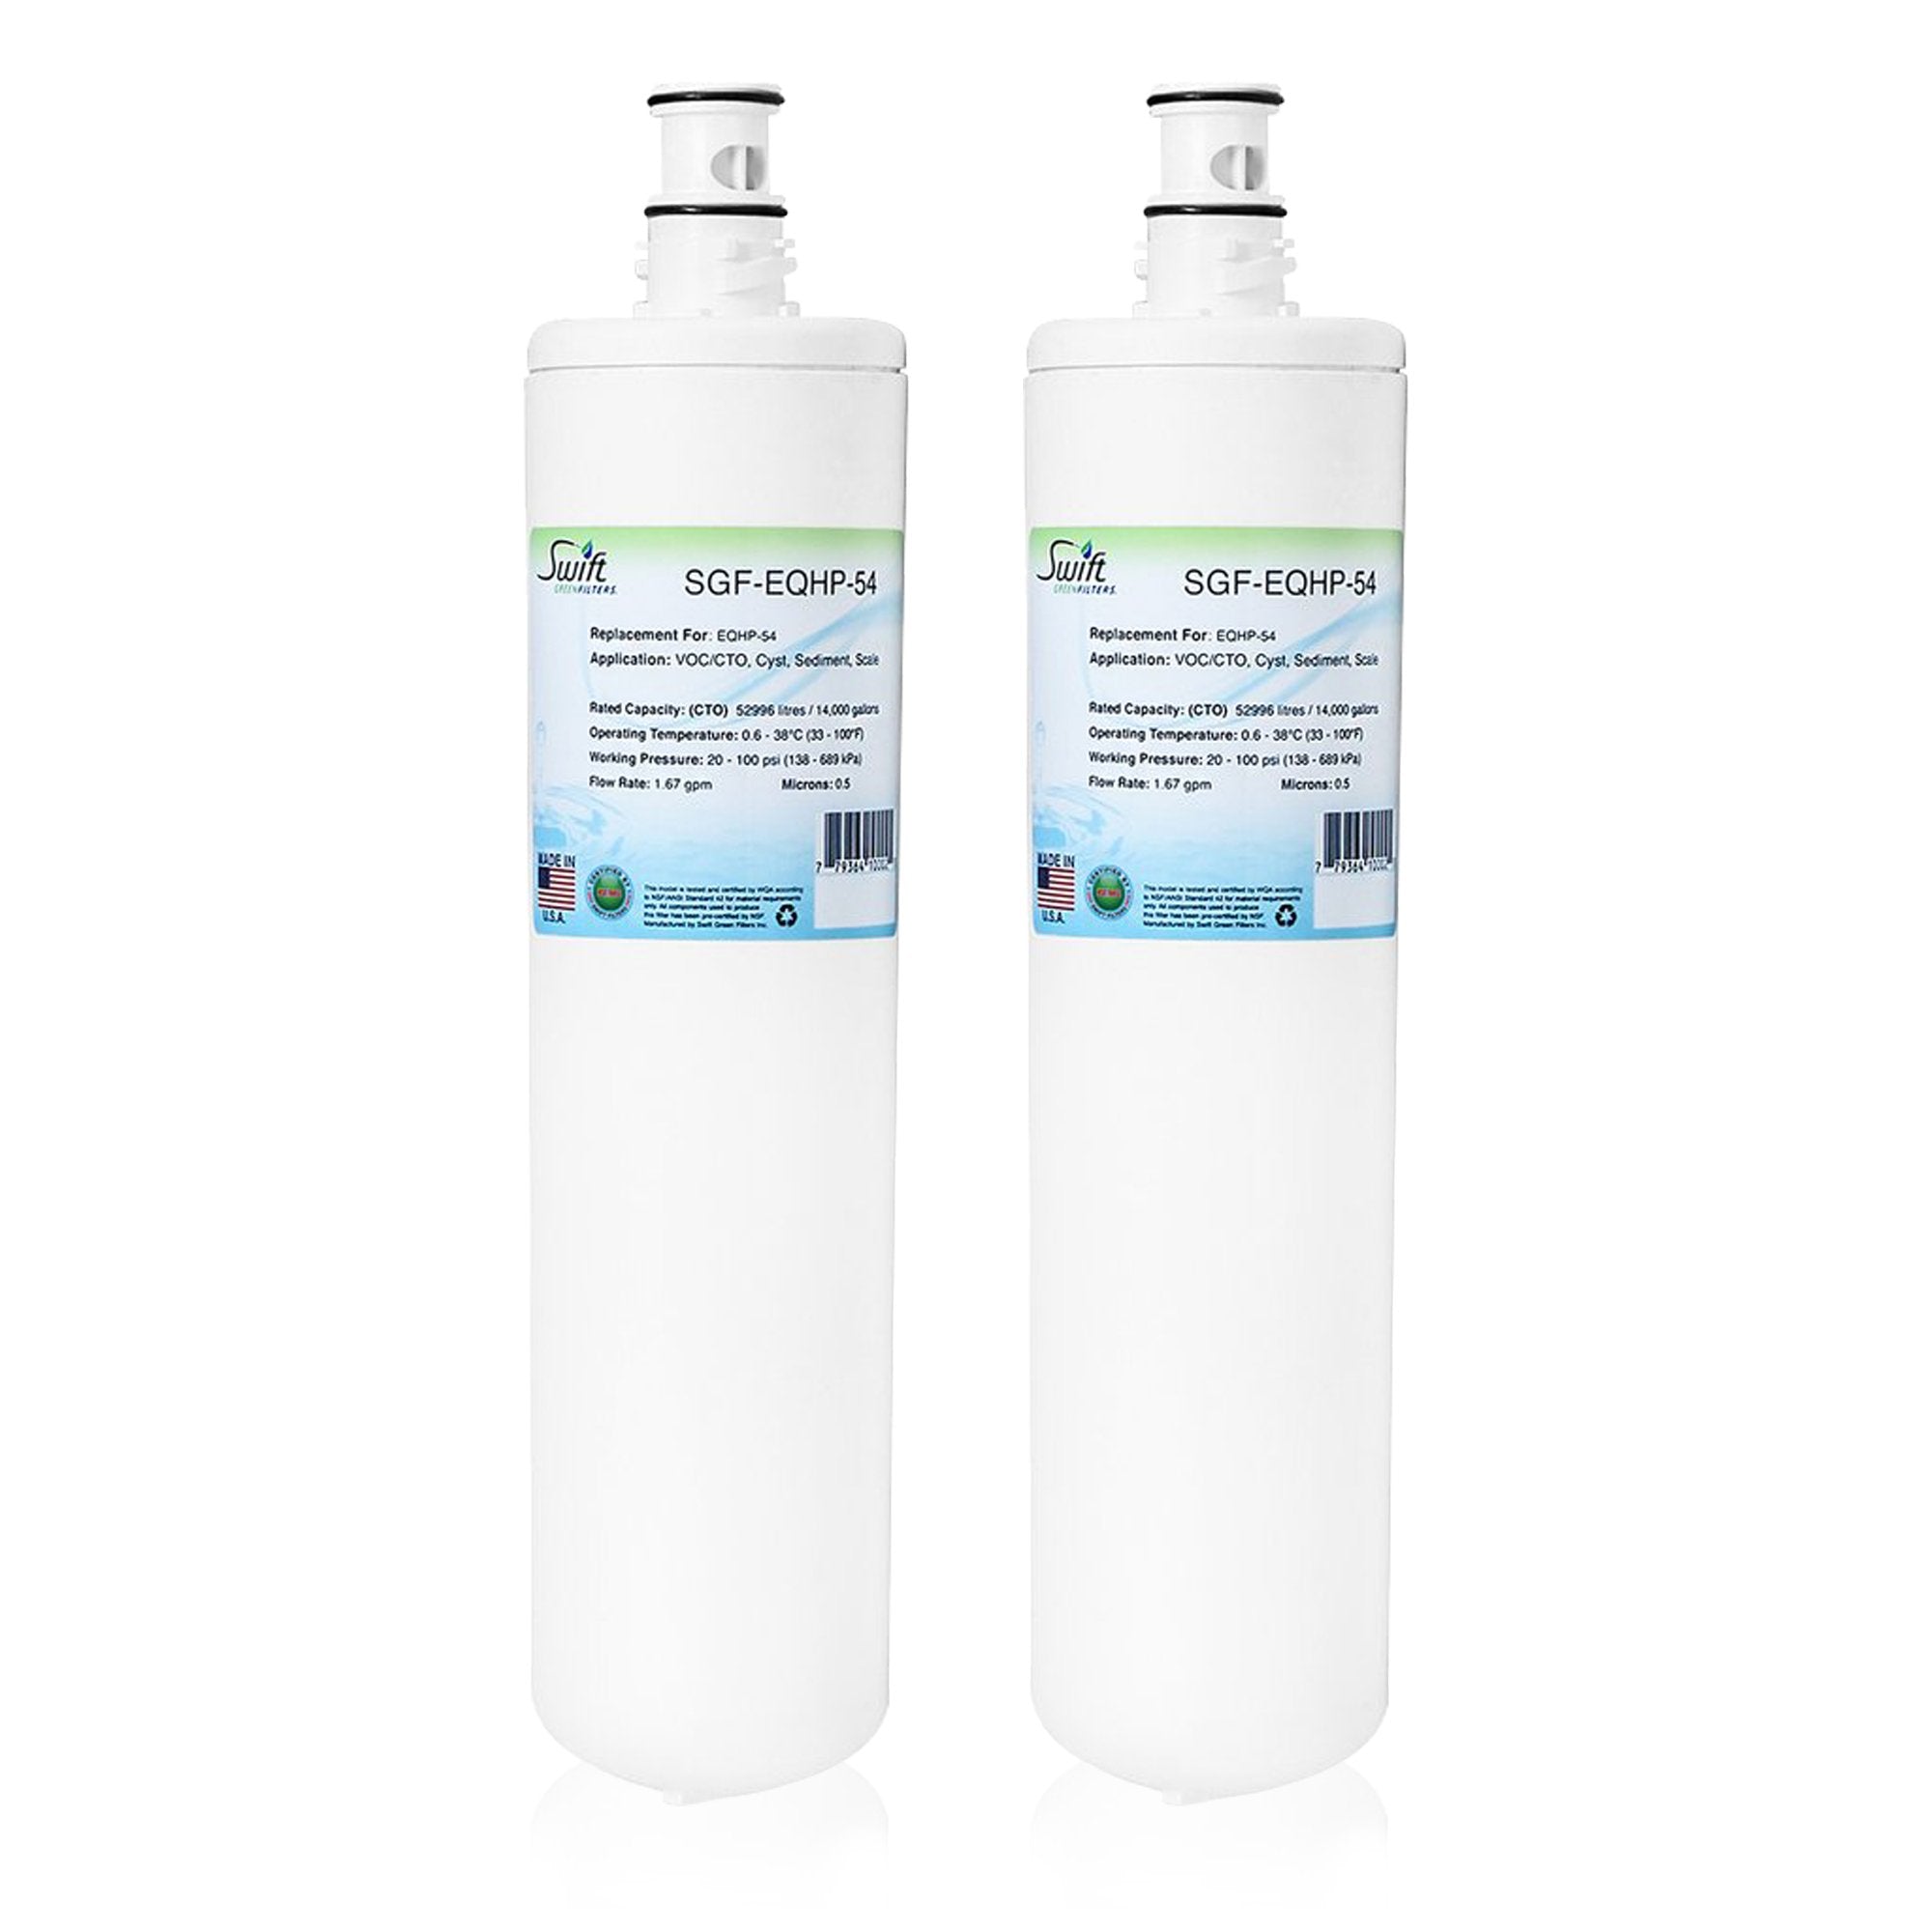 Replacement for Bunn Bunn EQHP-54 Water Filter by Swift Green Filters SGF-EQHP-54